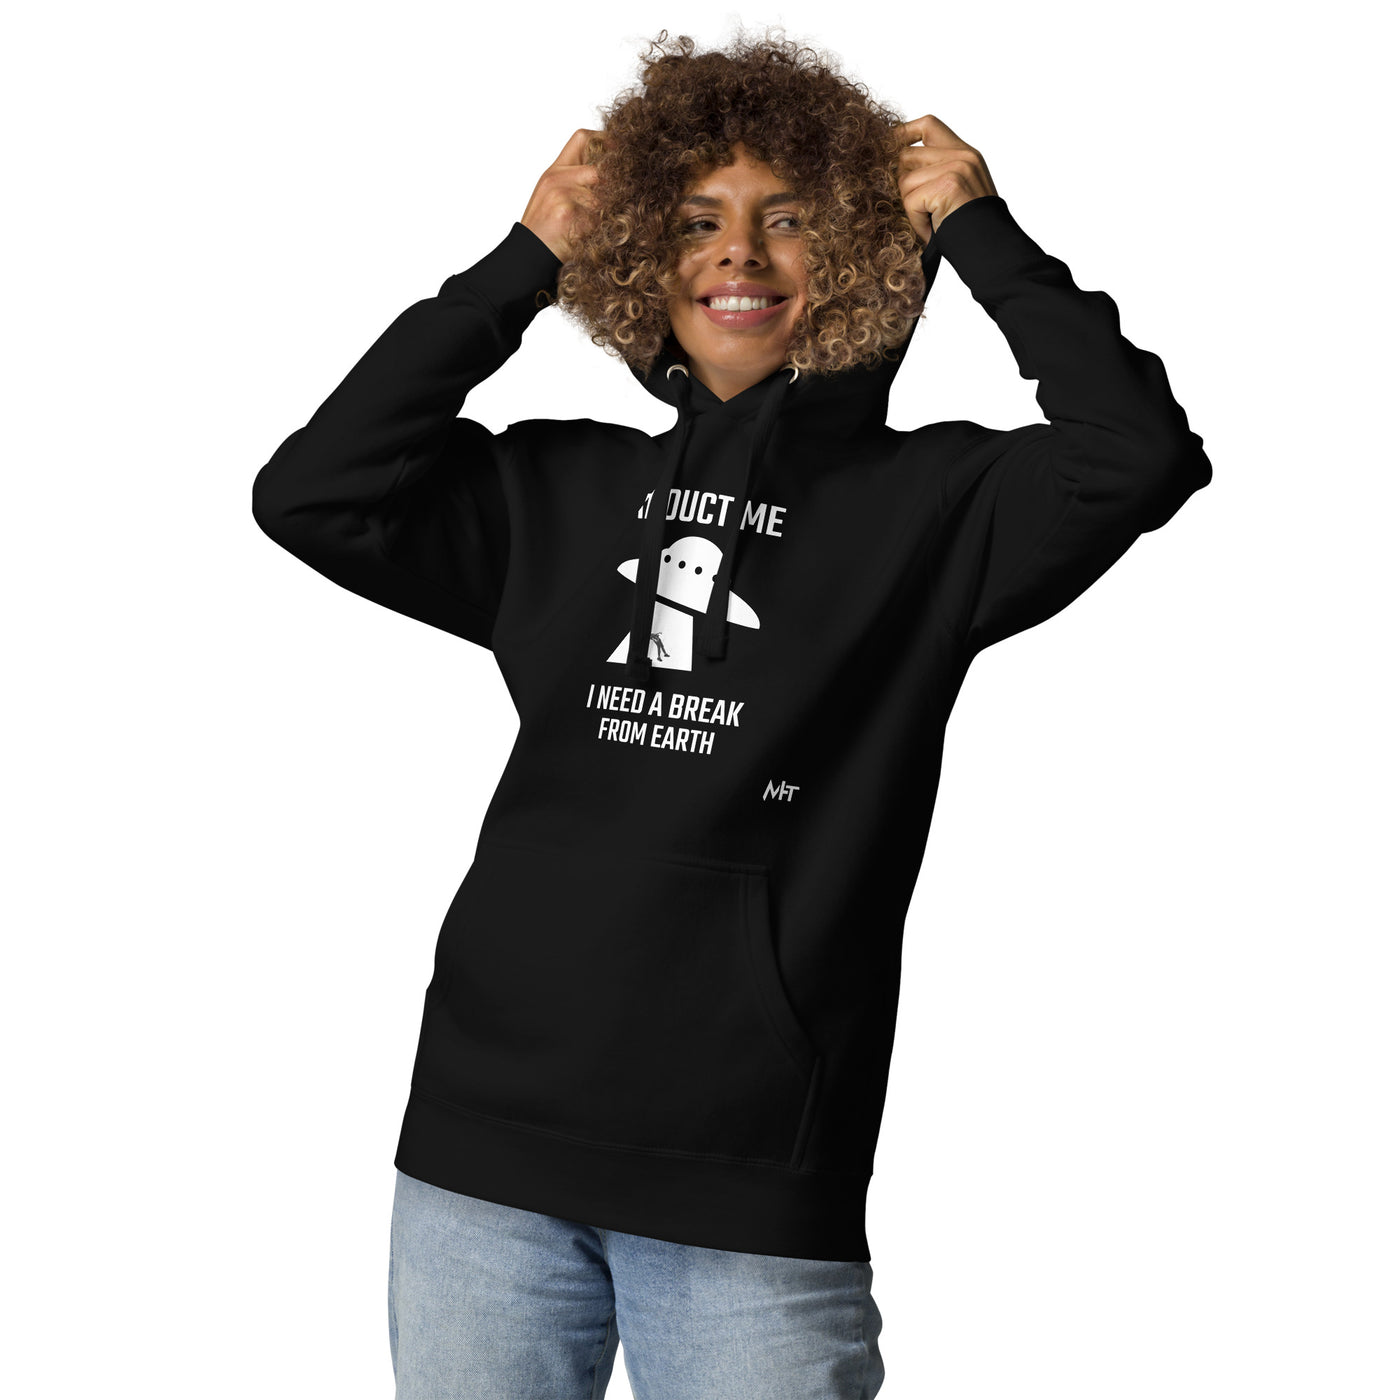 Abduct me I need a break from Earth v1 - Unisex Hoodie